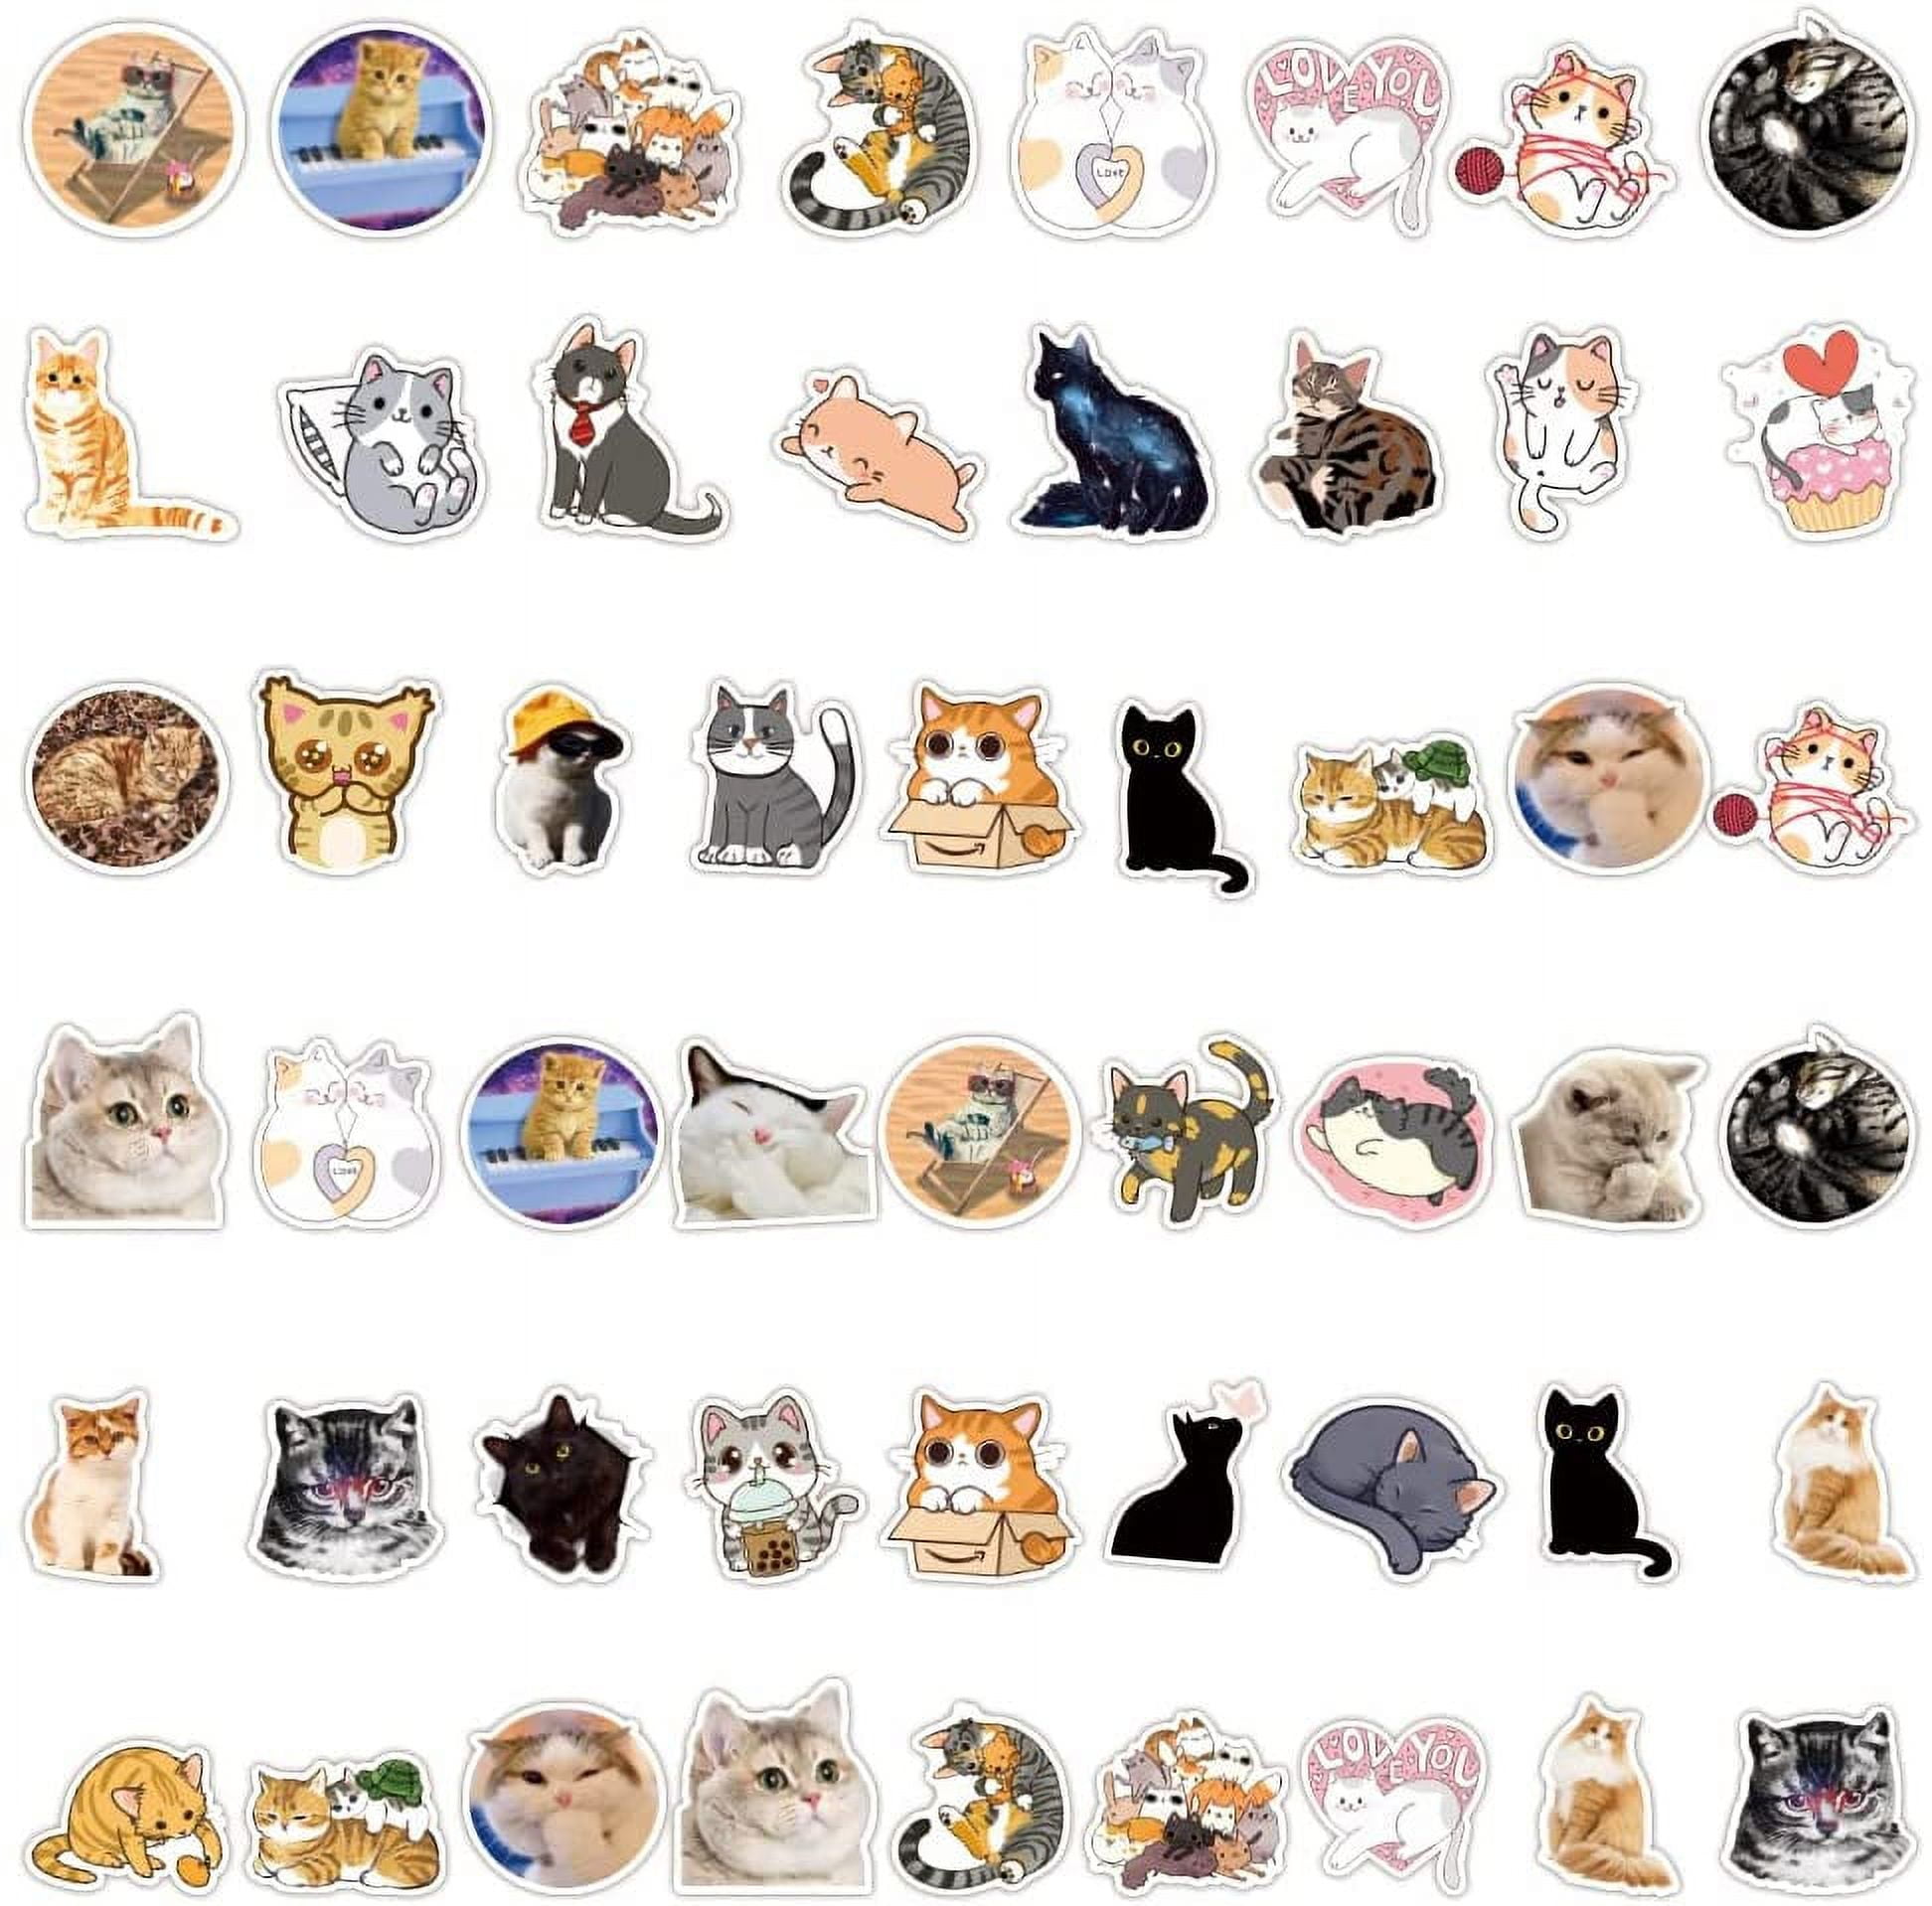 AURORA TRADE 100pcs Cute Cat Stickers for Water Bottle,Vinyl Waterproof Stickers  Decals Laptop Scrapbook Bicycle Ipad Phone, Cat Gifts Merchandise Stuff  Things 